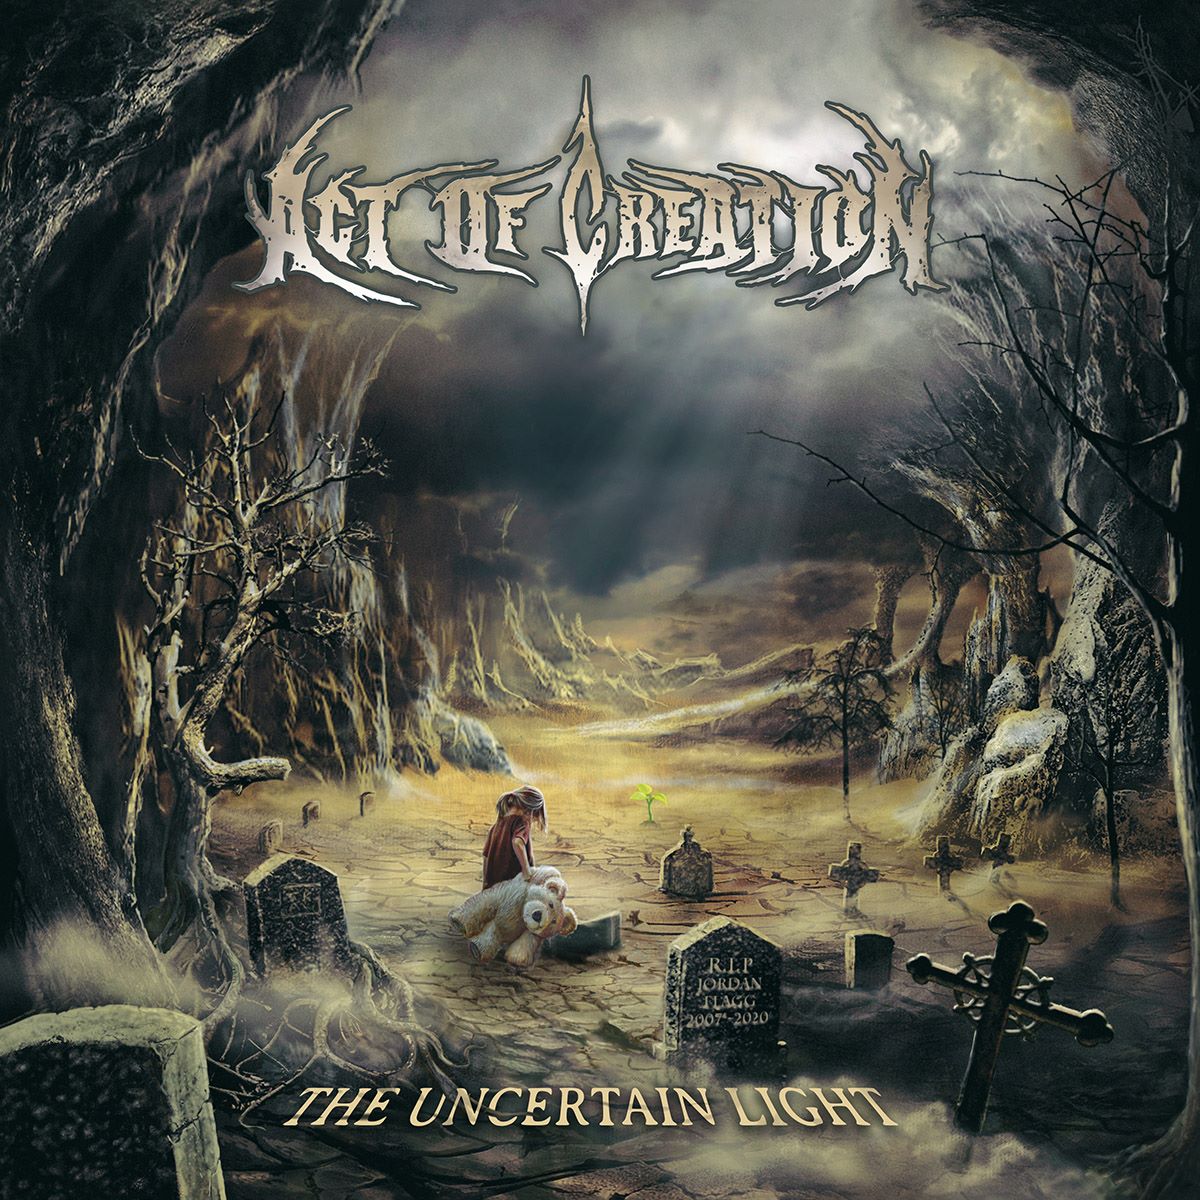 Act of creation - the uncertain light - album cover